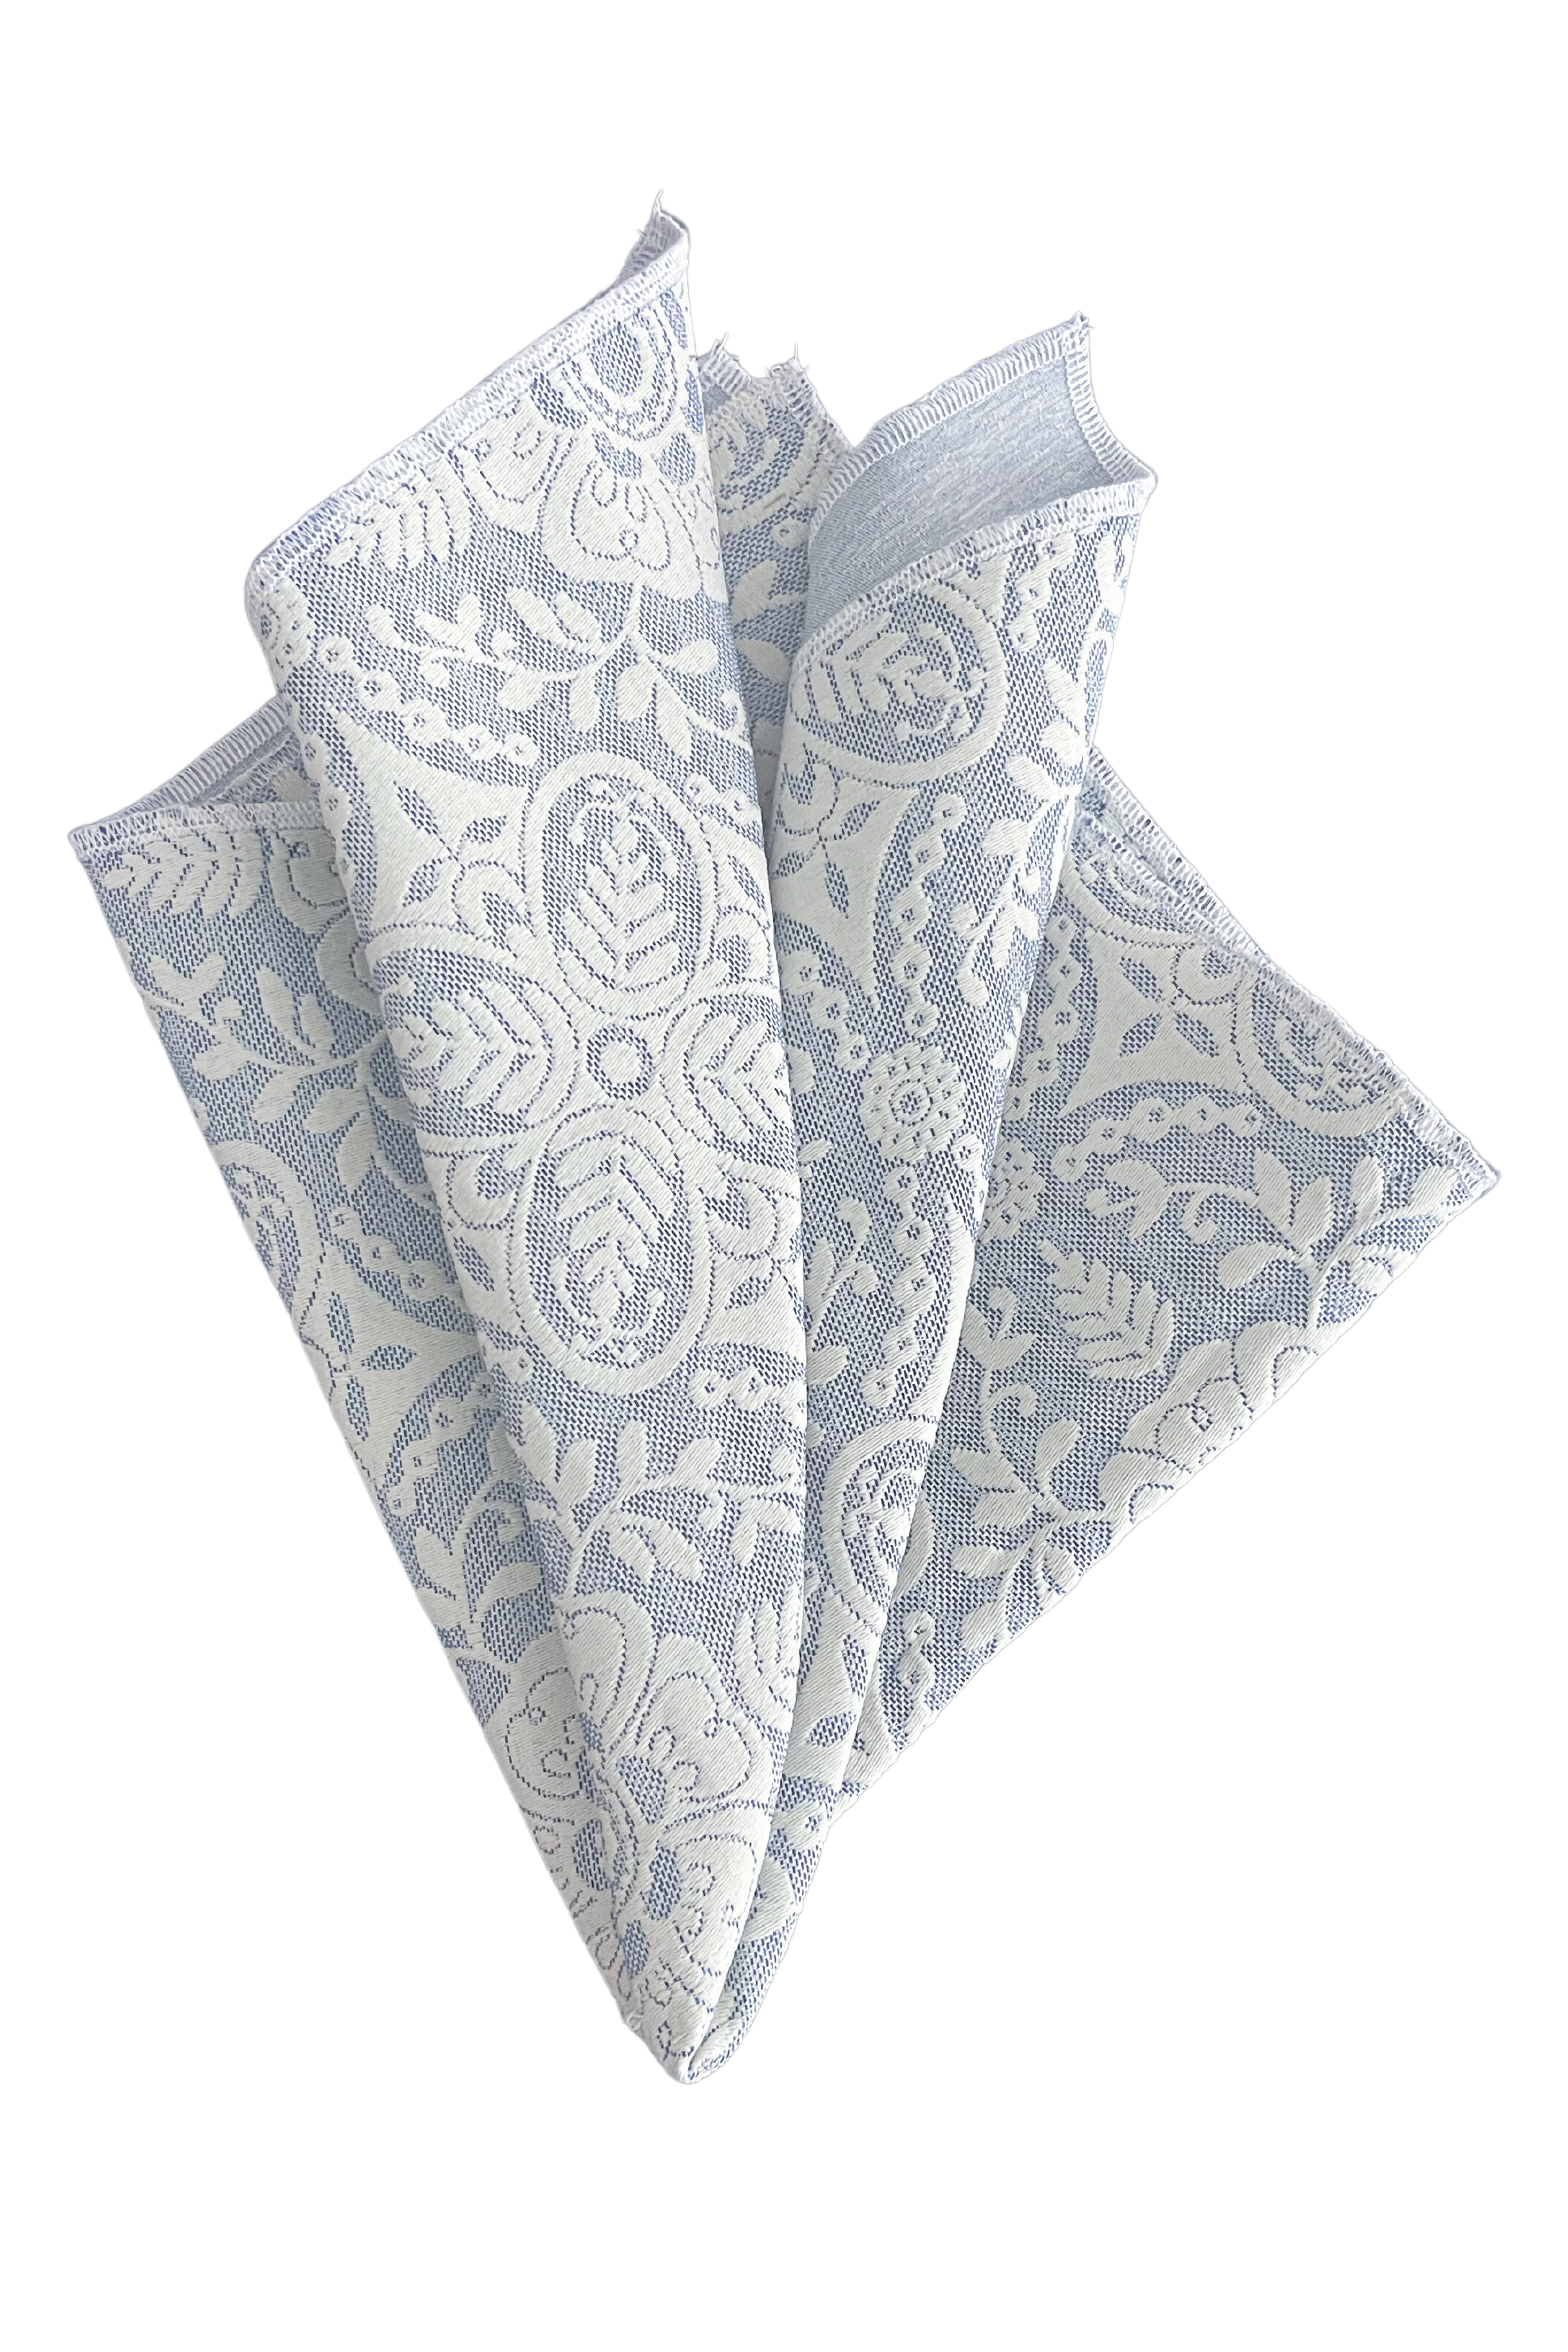 Blue French Floral Napkin with a floral tile pattern reversible with a solid blue on the reverse side